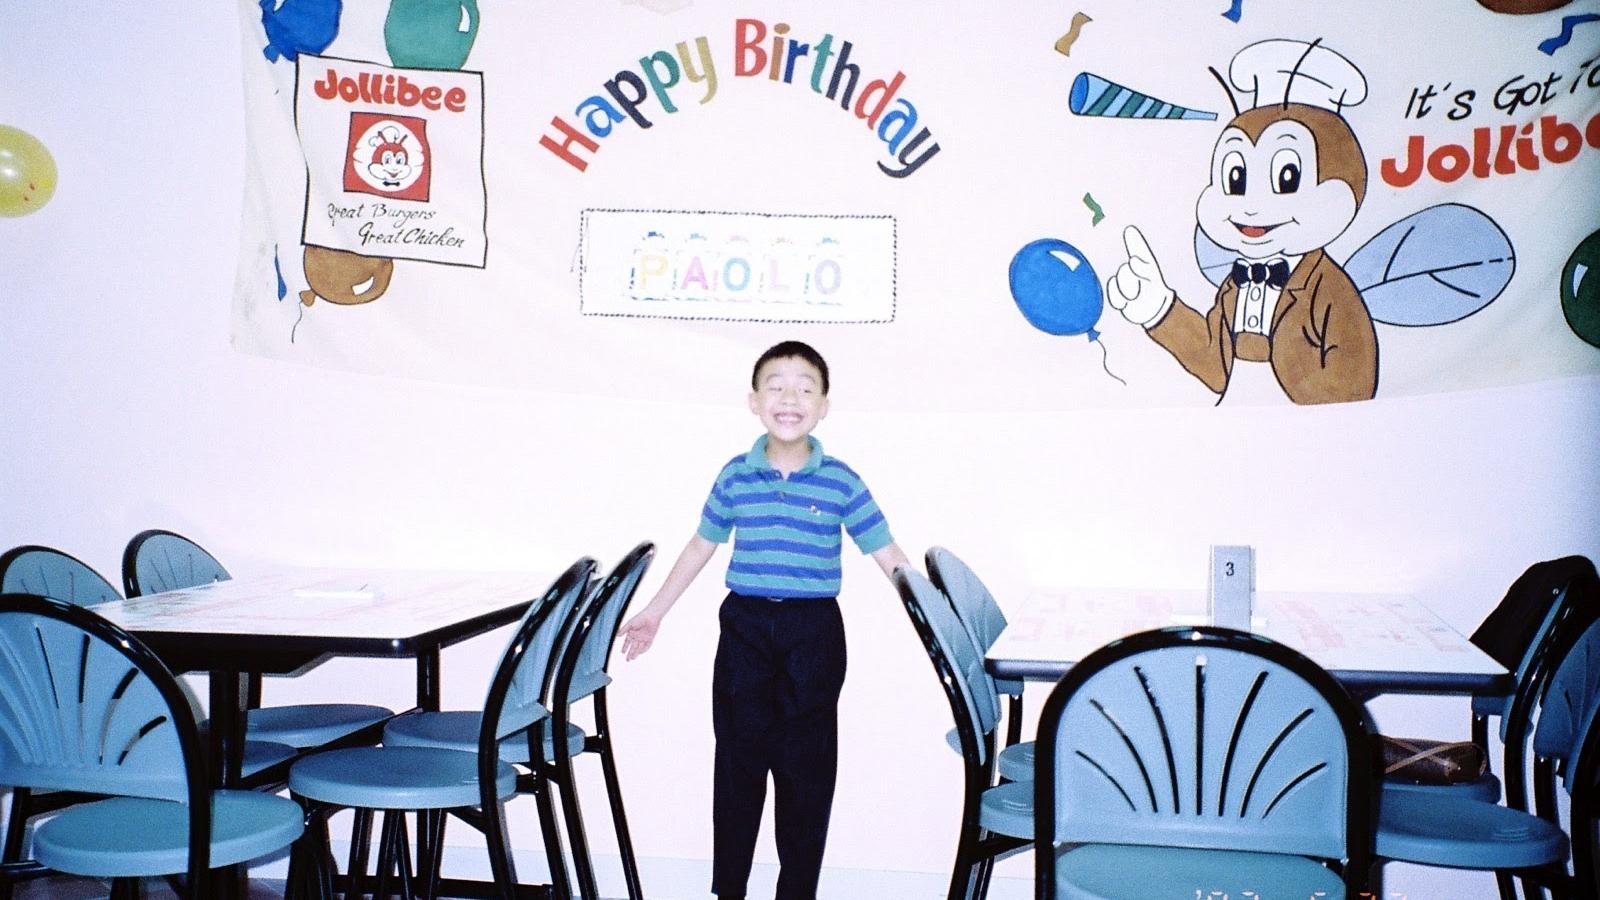 A 7-year-old stands in a Jollibee restaurant with birthday decorations.